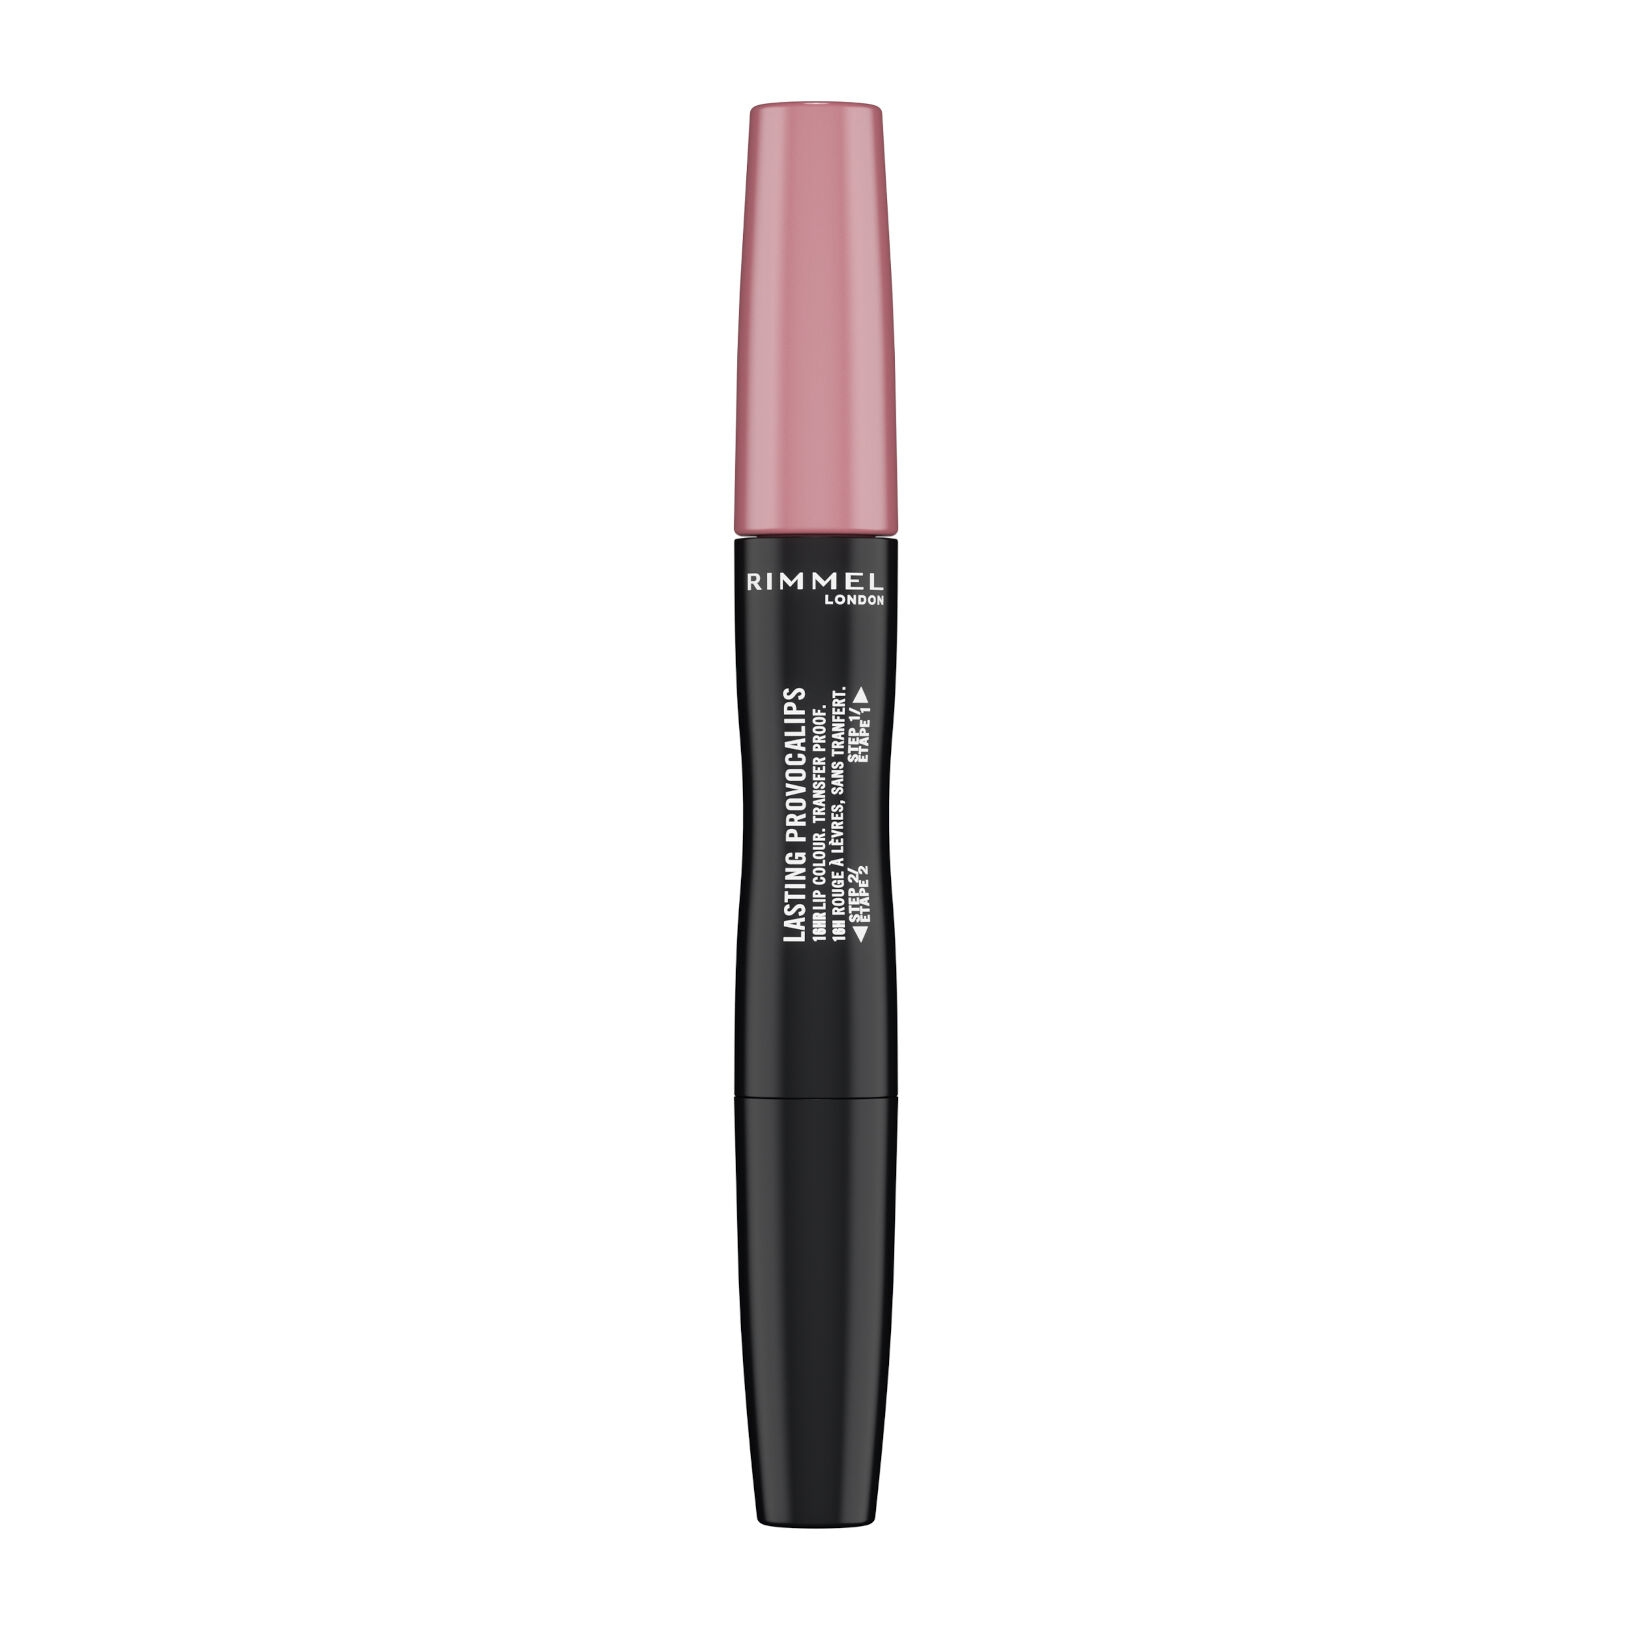 Image of Rossetto Liquido Provocalips 220 Rimmel 3,5g